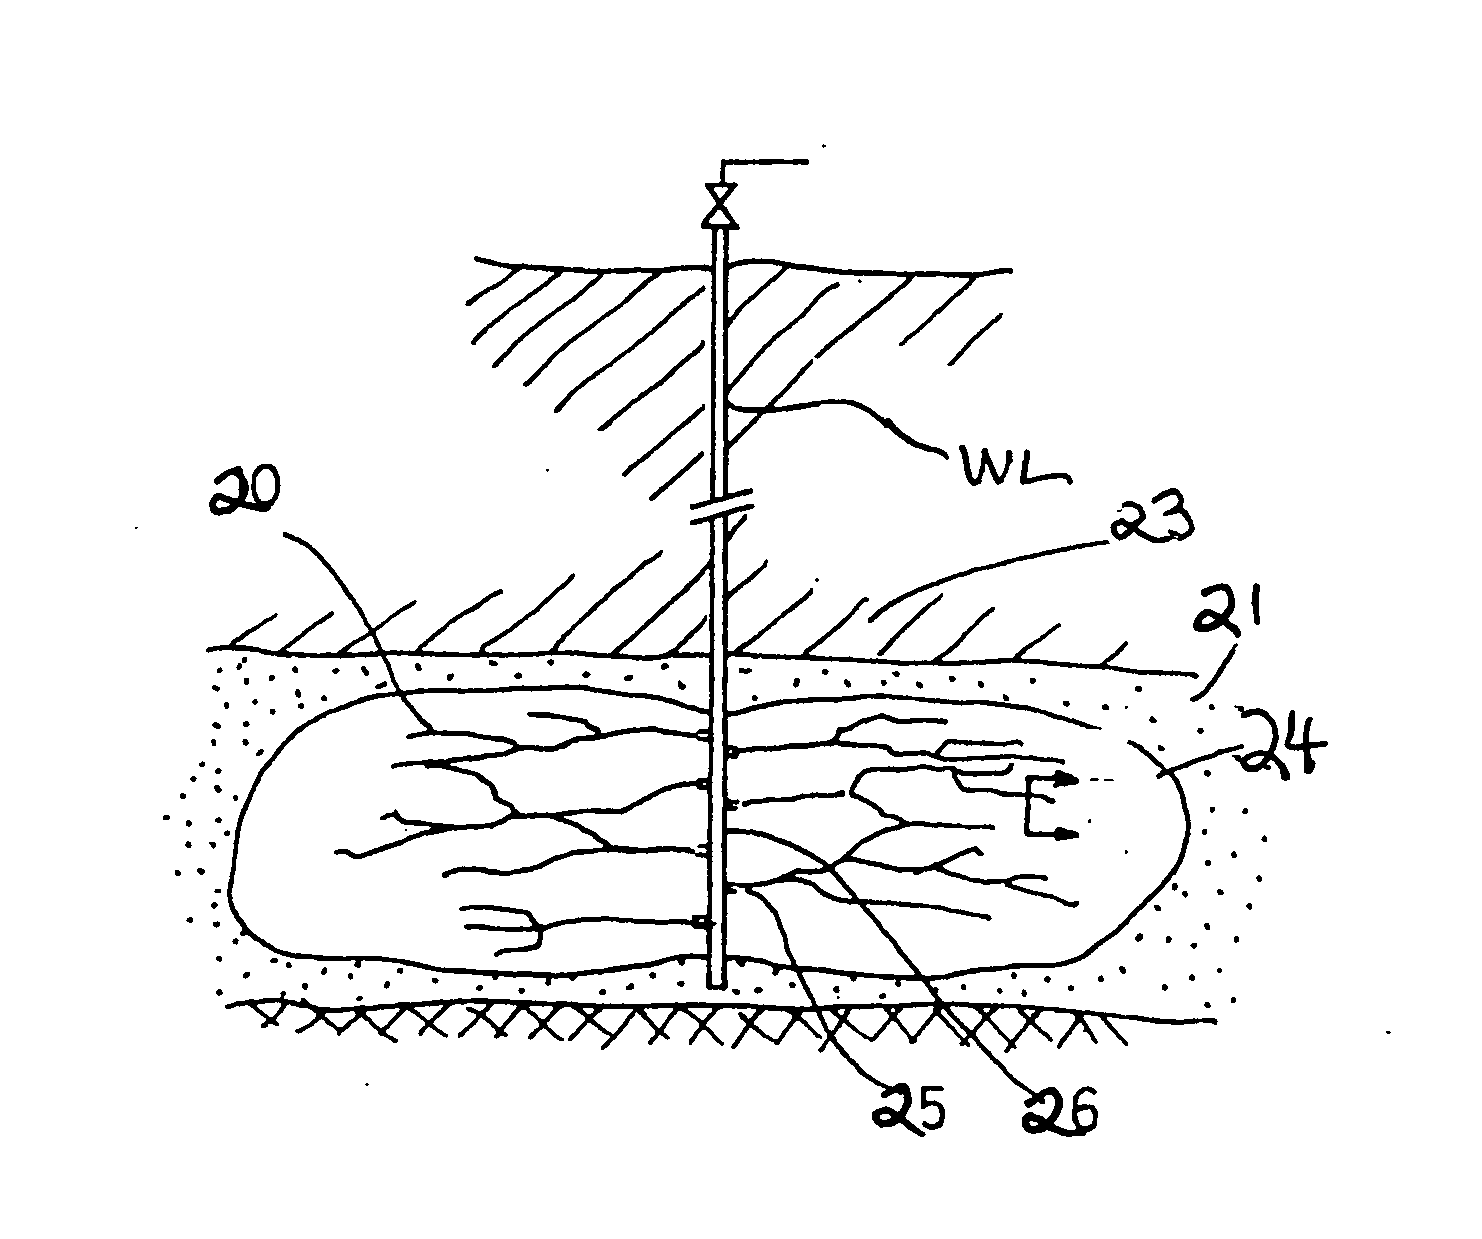 Acidizing materials and methods and fluids for earth formation protection